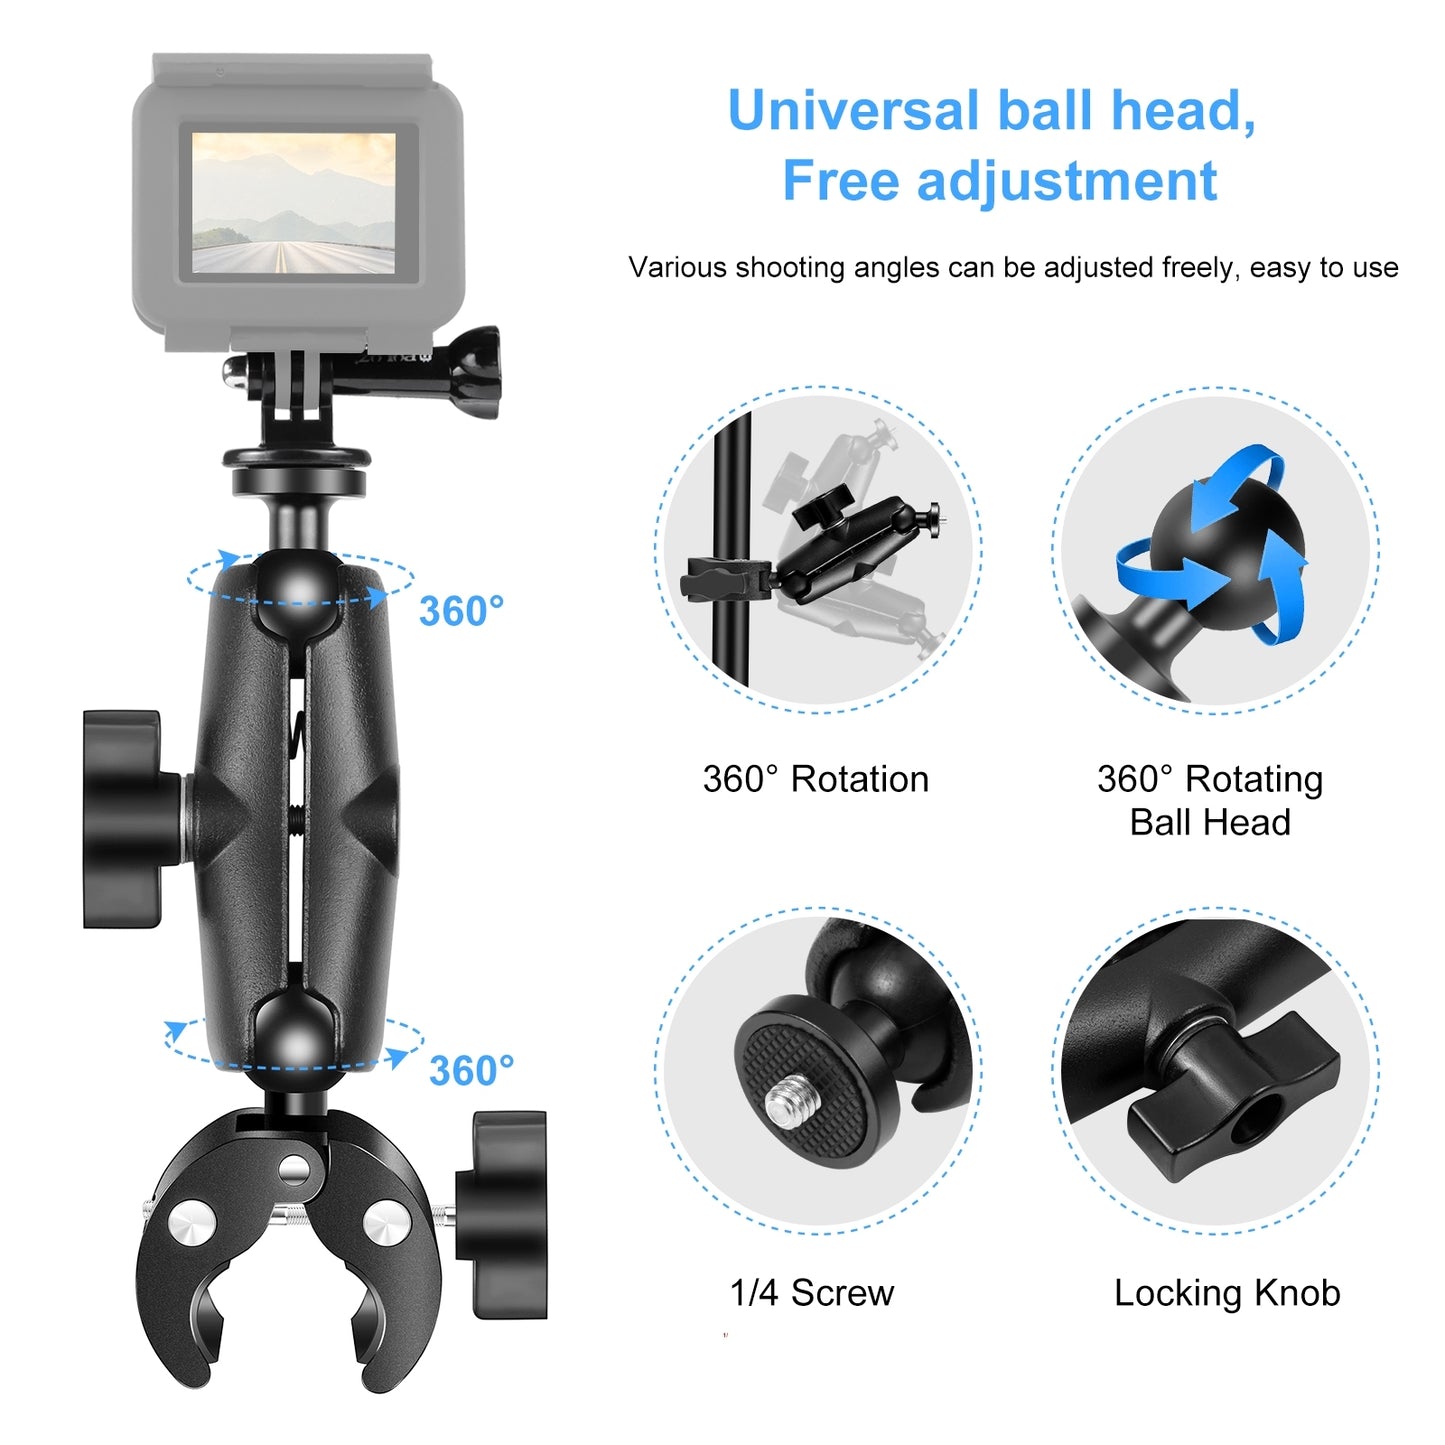 Universal Crab Claw Clamp Mount for GoPro, Insta360, and DJI Action Cameras